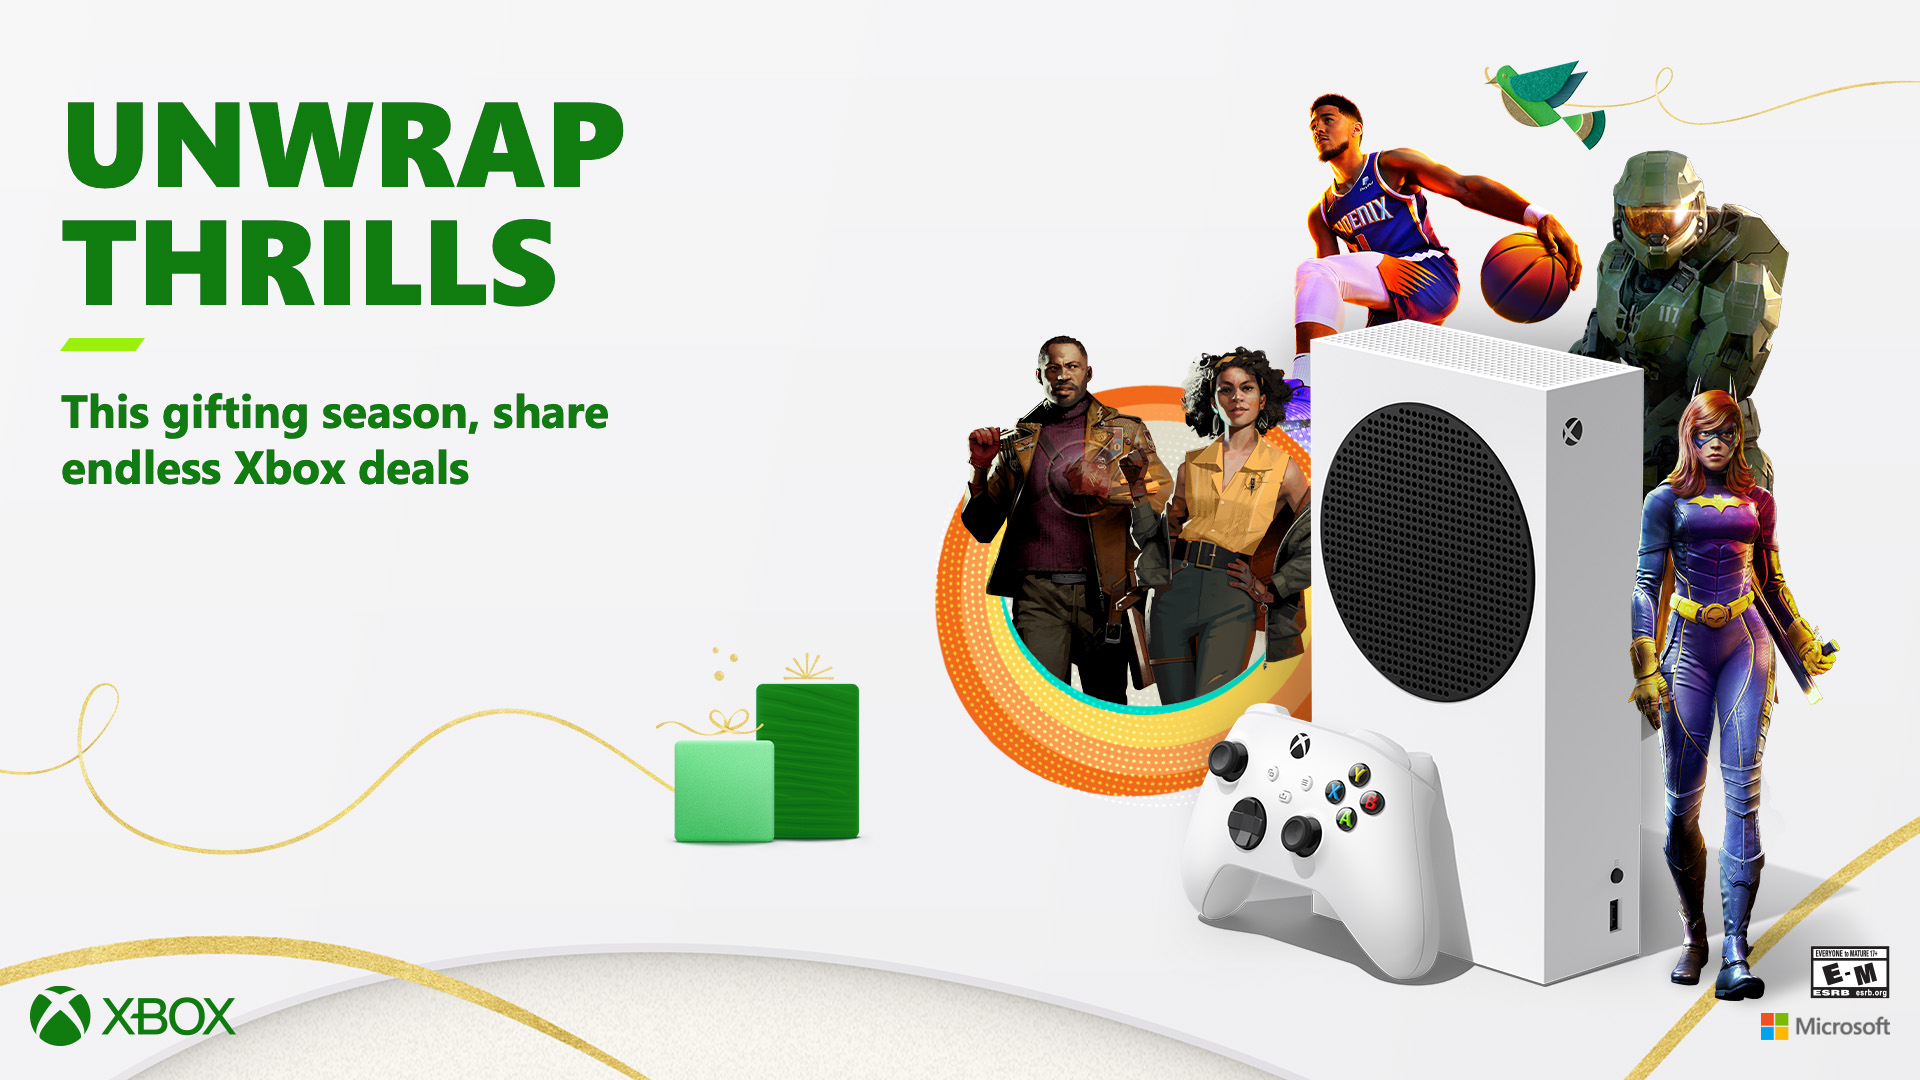 Economisch Percentage Dakloos Black Friday: Unwrap Thrills with $50 off Xbox Series S, 900+ Games on Sale,  and More! - Xbox Wire